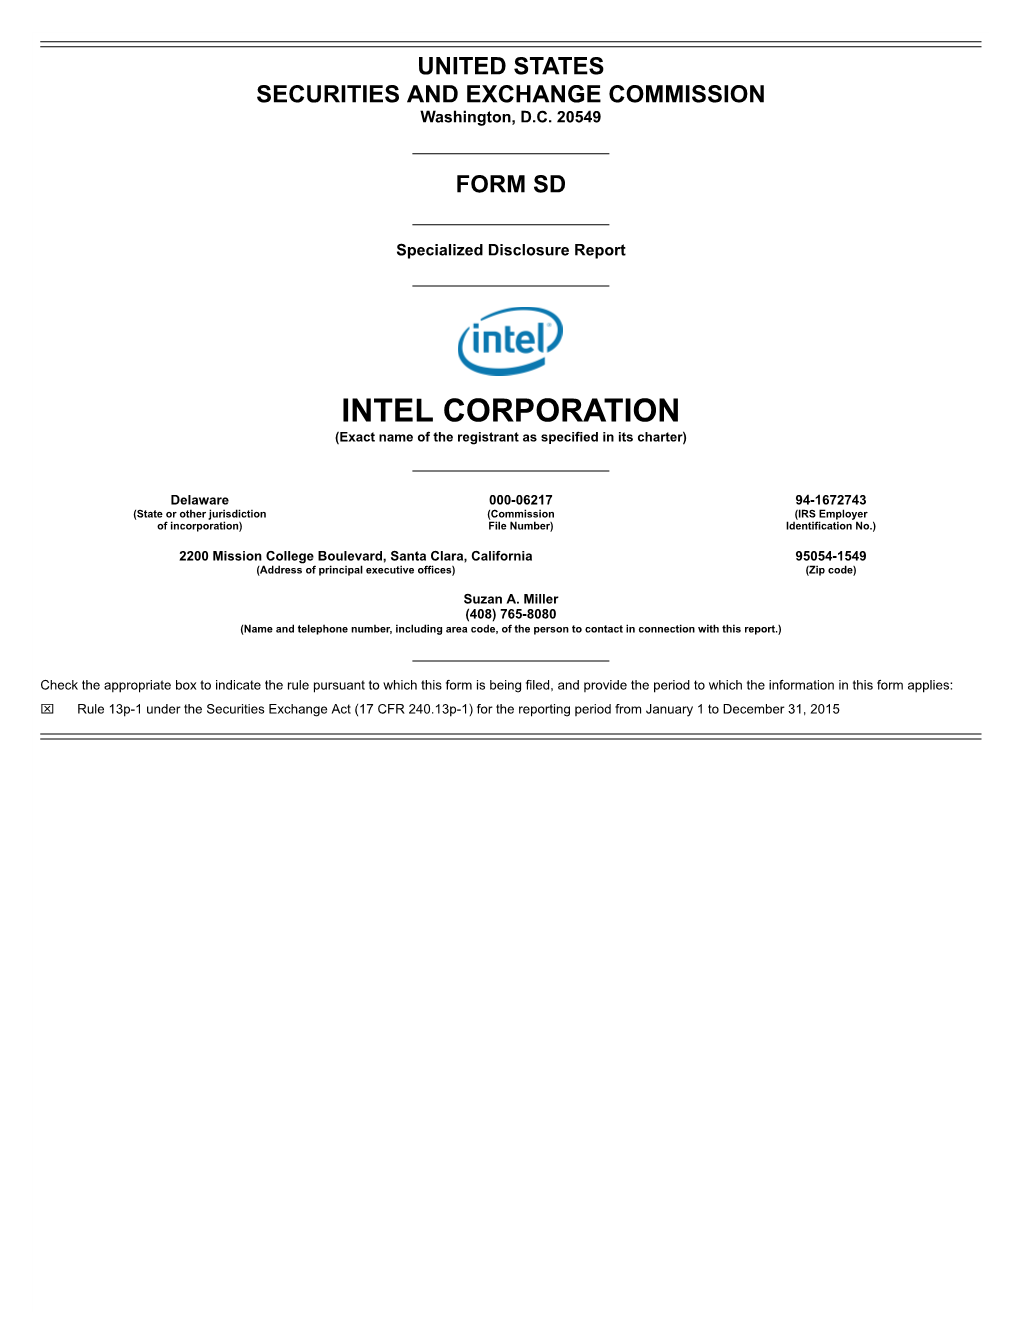 INTEL CORPORATION (Exact Name of the Registrant As Specified in Its Charter)